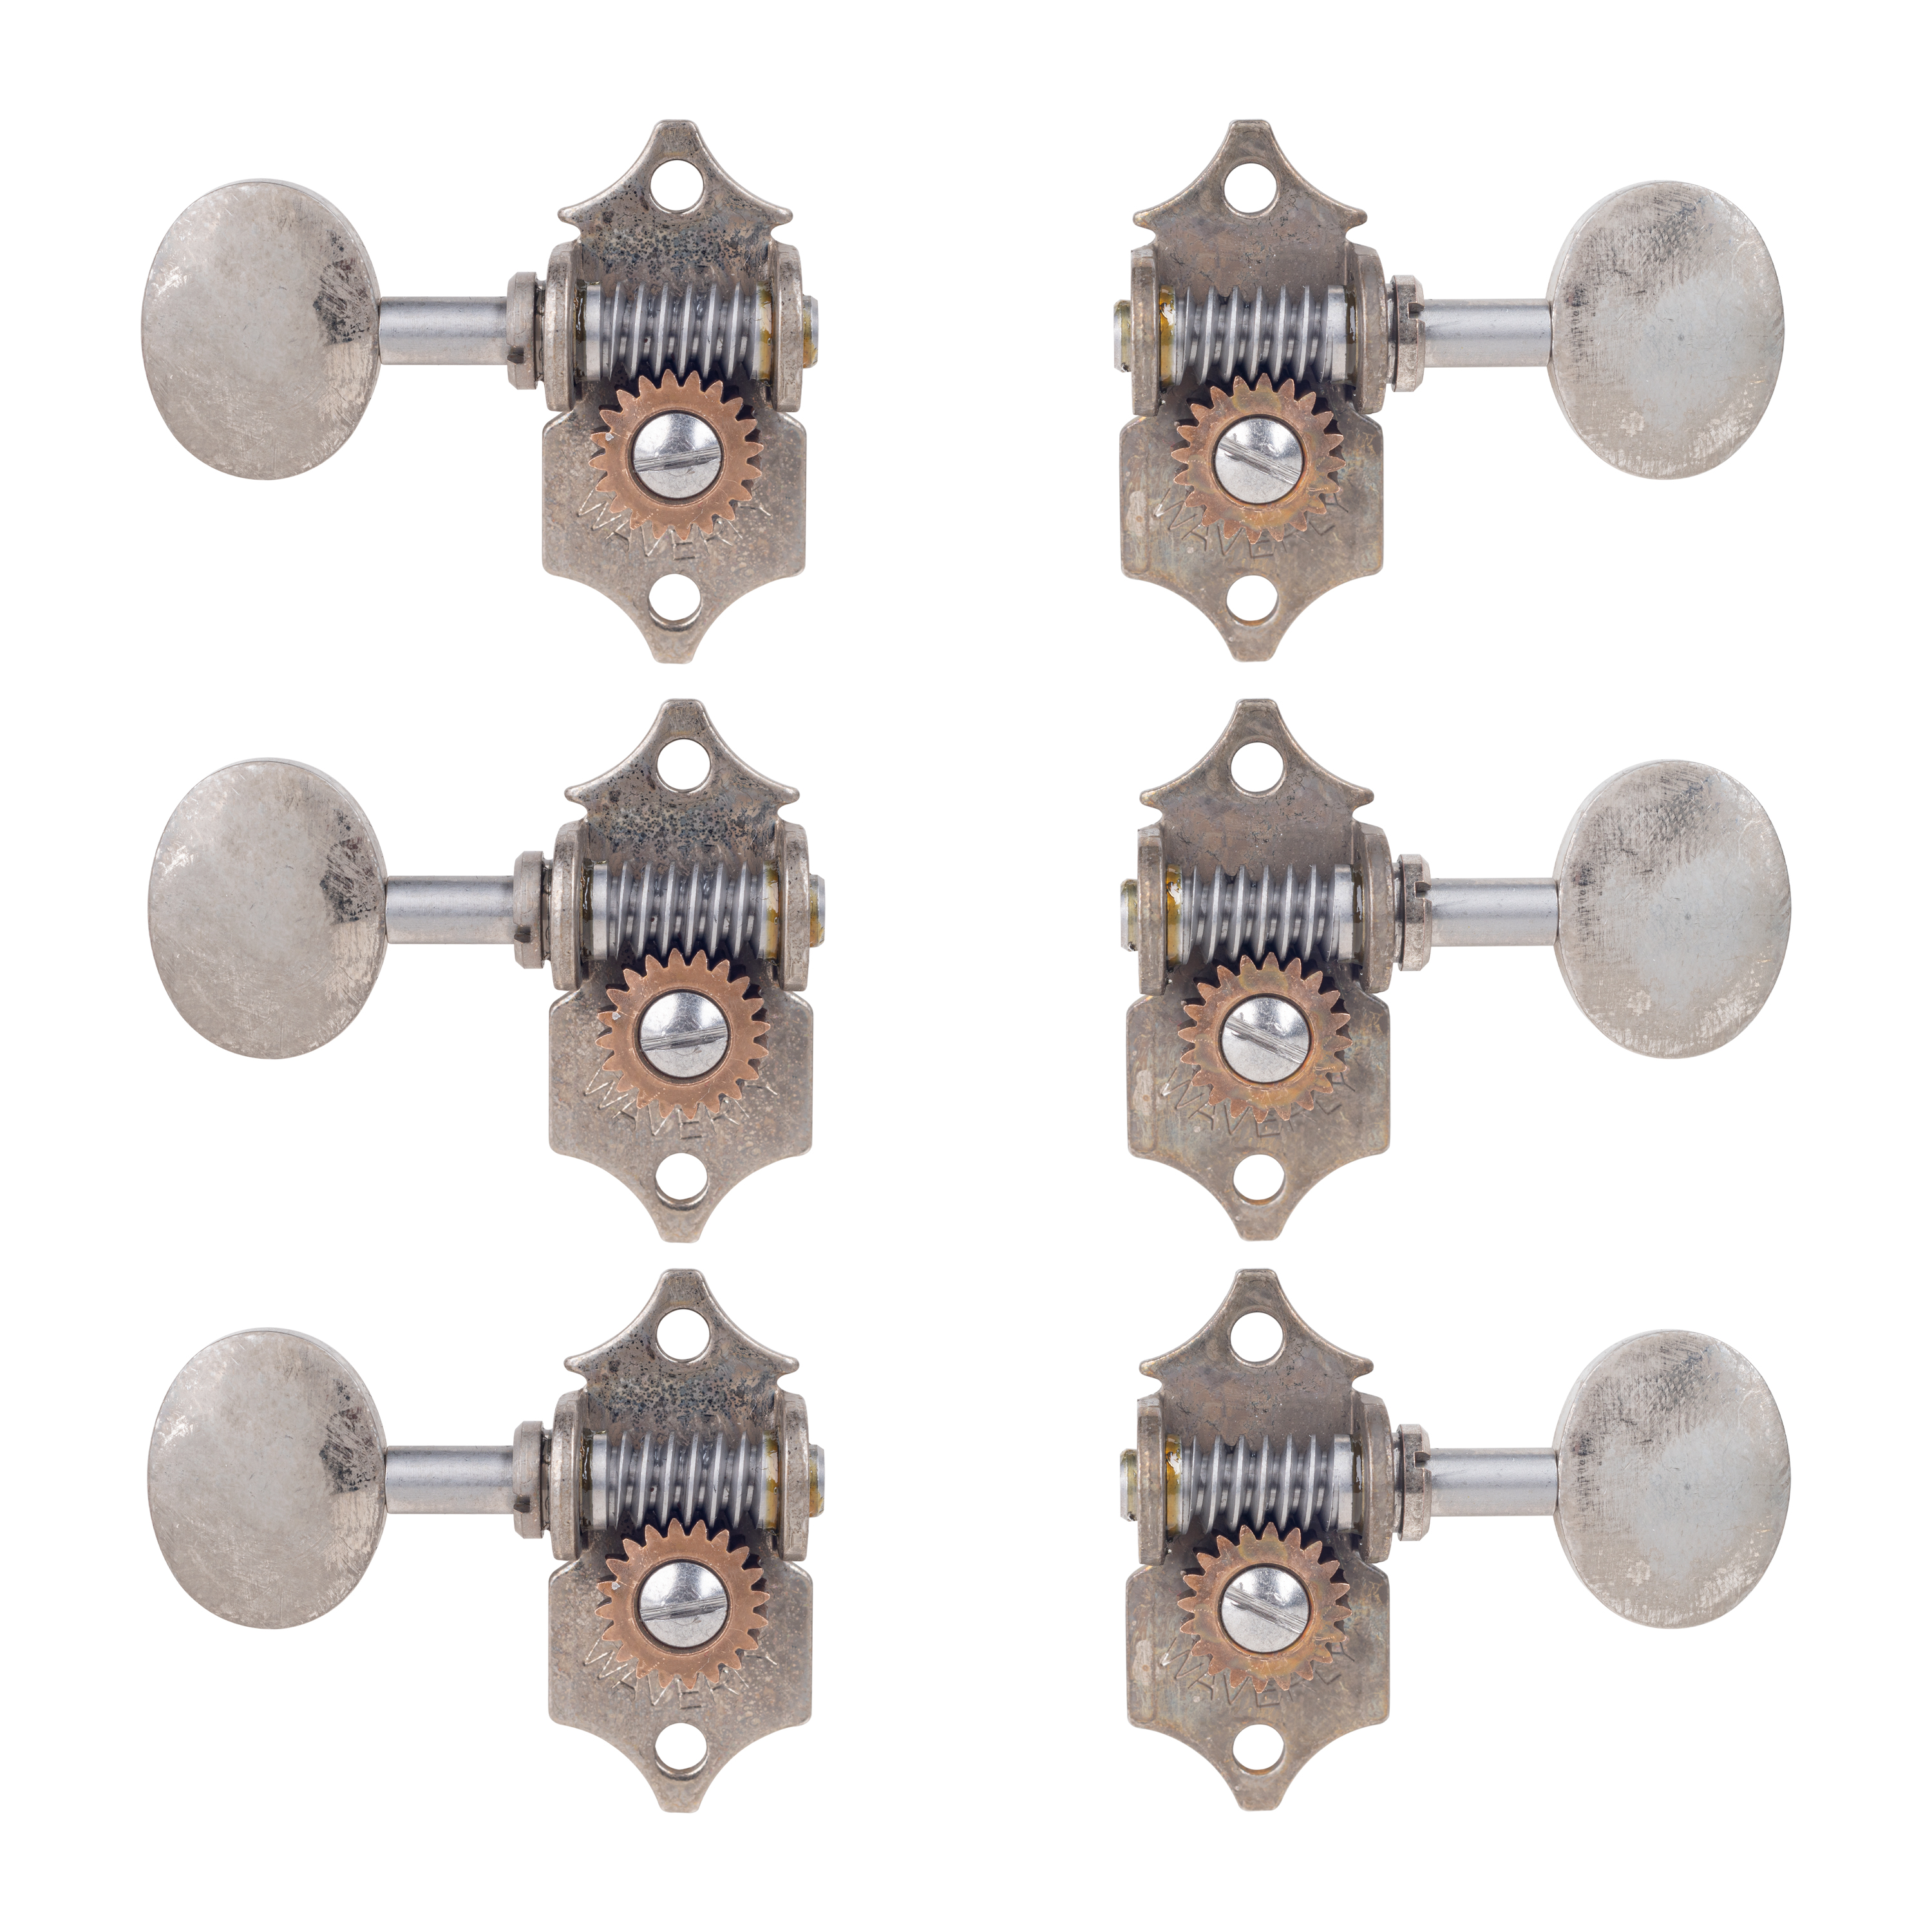 Waverly High Ratio Guitar Tuners with Vintage Oval Knobs for Solid Pegheads